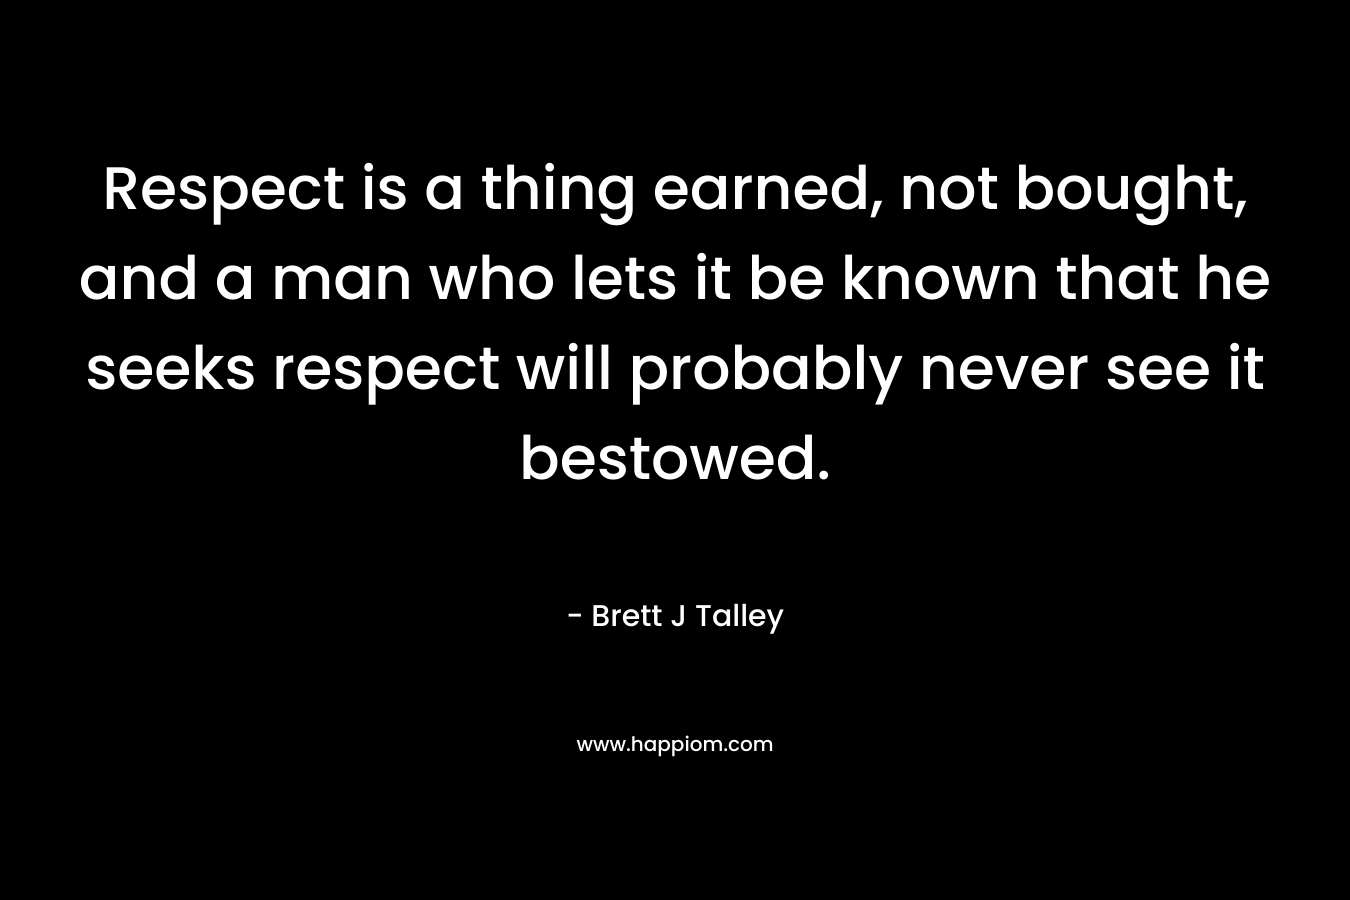 Respect is a thing earned, not bought, and a man who lets it be known that he seeks respect will probably never see it bestowed. – Brett J Talley